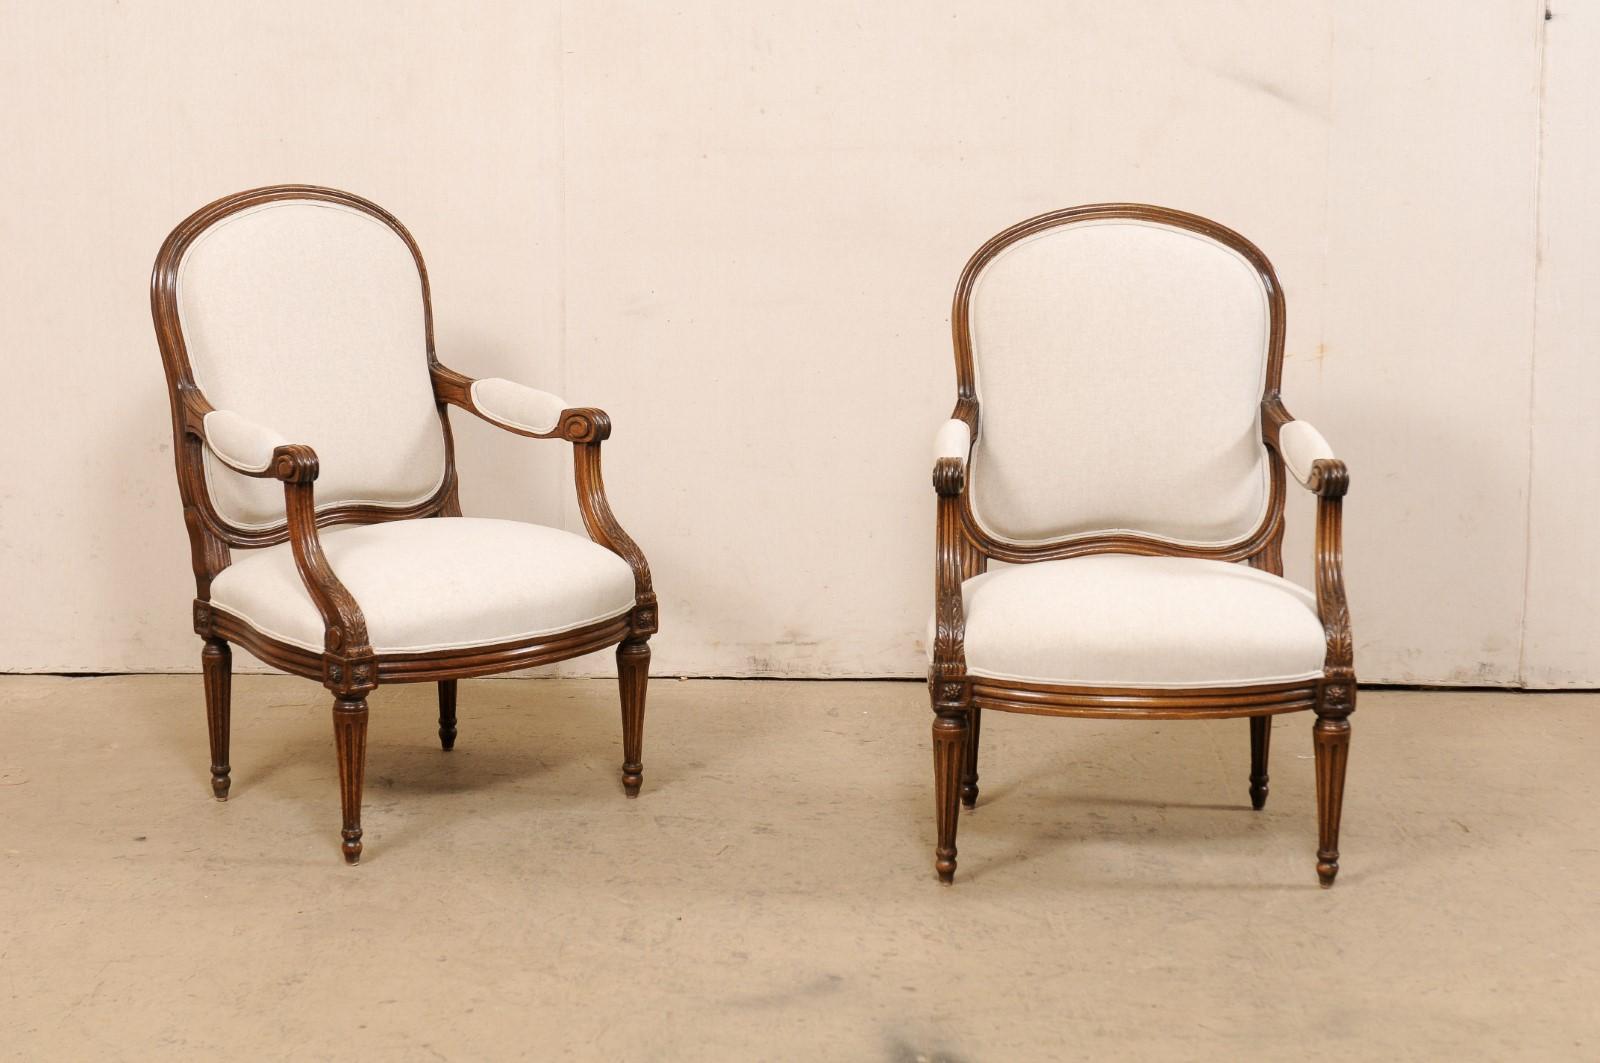 A French pair of timeless and elegant Louis XVI style armchairs from the 19th century. This antique pair of chairs from France each features a shapely, upholstered back, with elegantly arched crest rail, all framed within molded wood trim. Carved